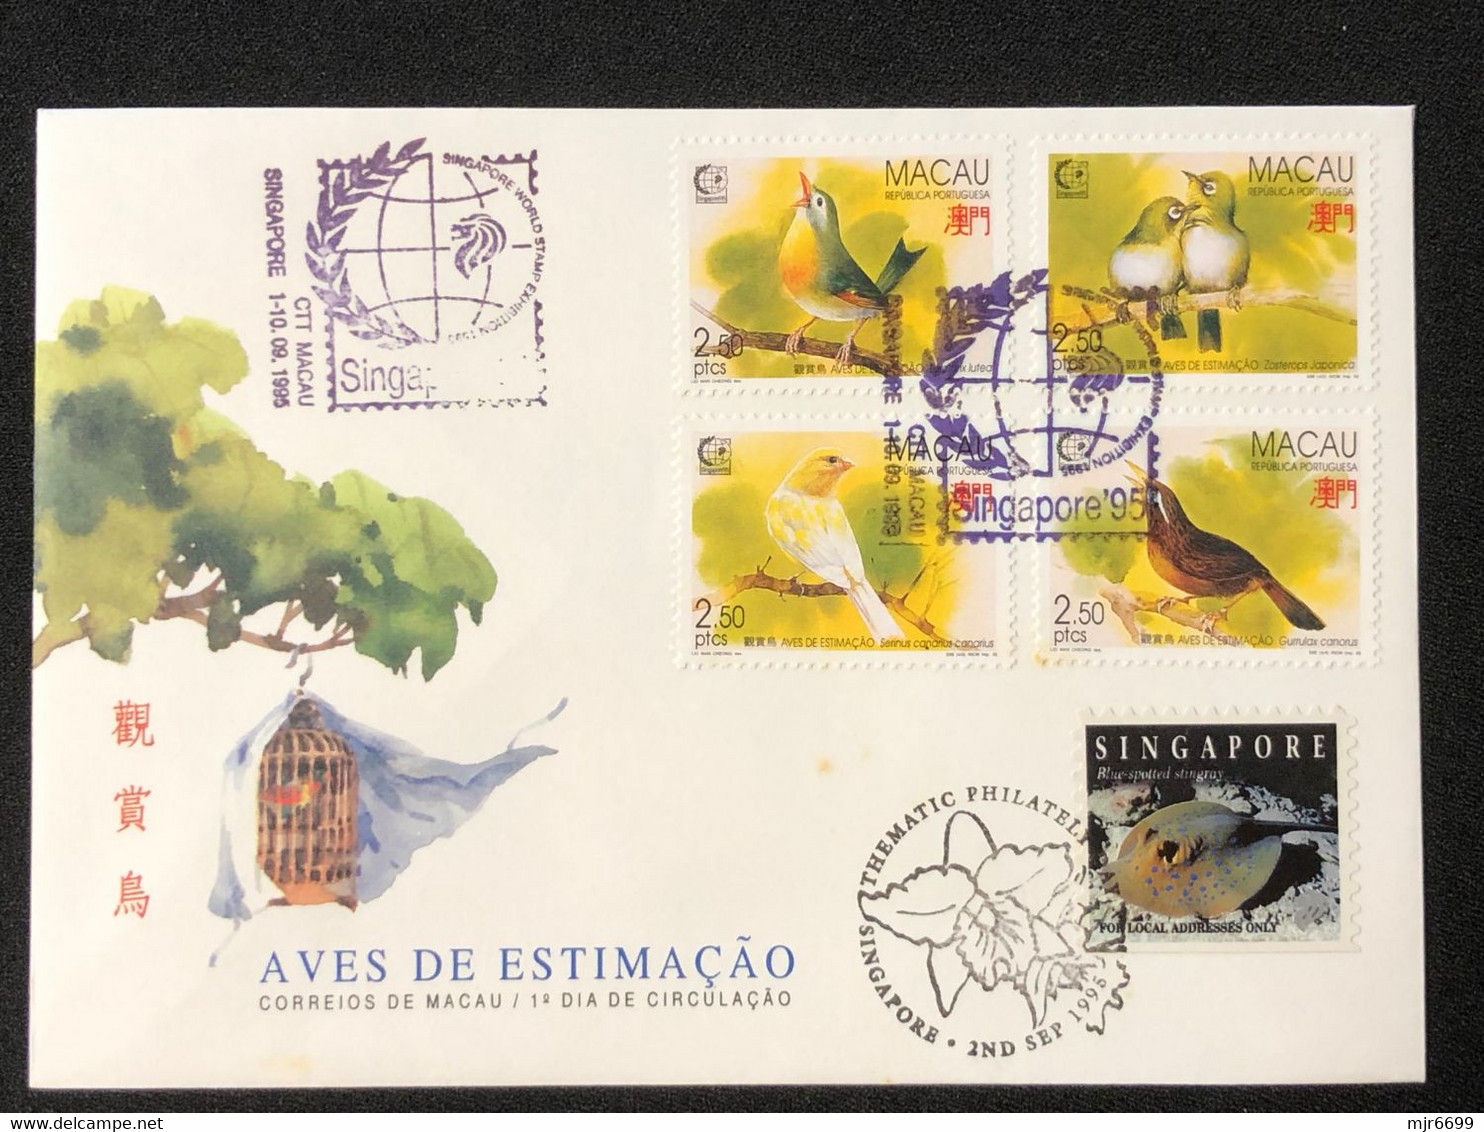 MACAU SINGAPORE WORLD STAMP EXPO 95 COMMEMORATIVE FIRST DAY COVER - Storia Postale